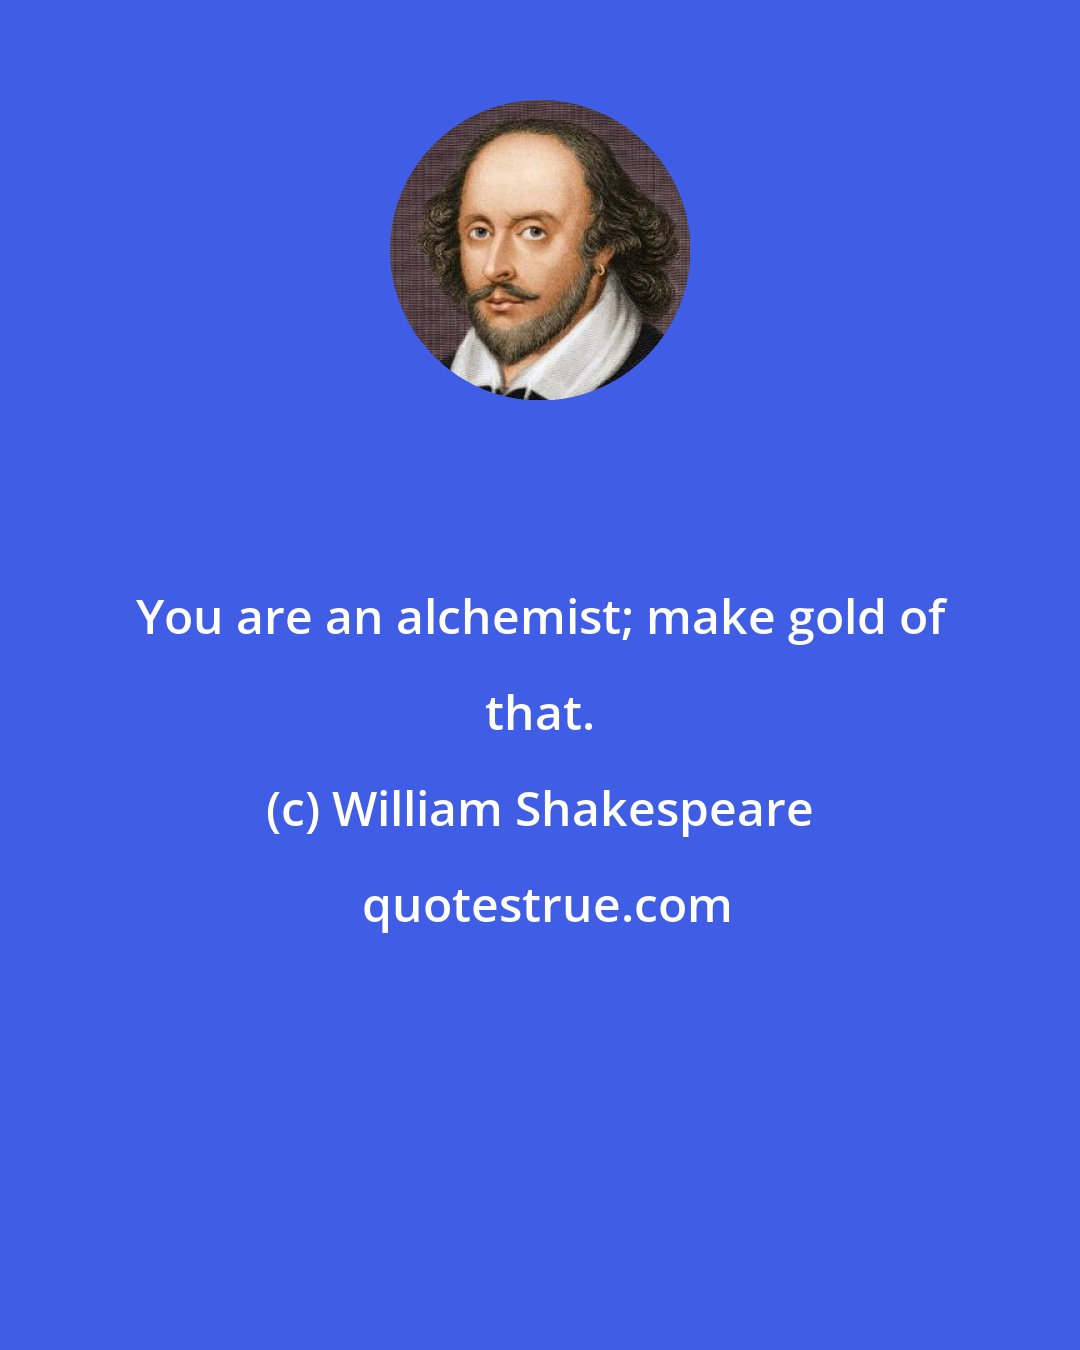 William Shakespeare: You are an alchemist; make gold of that.